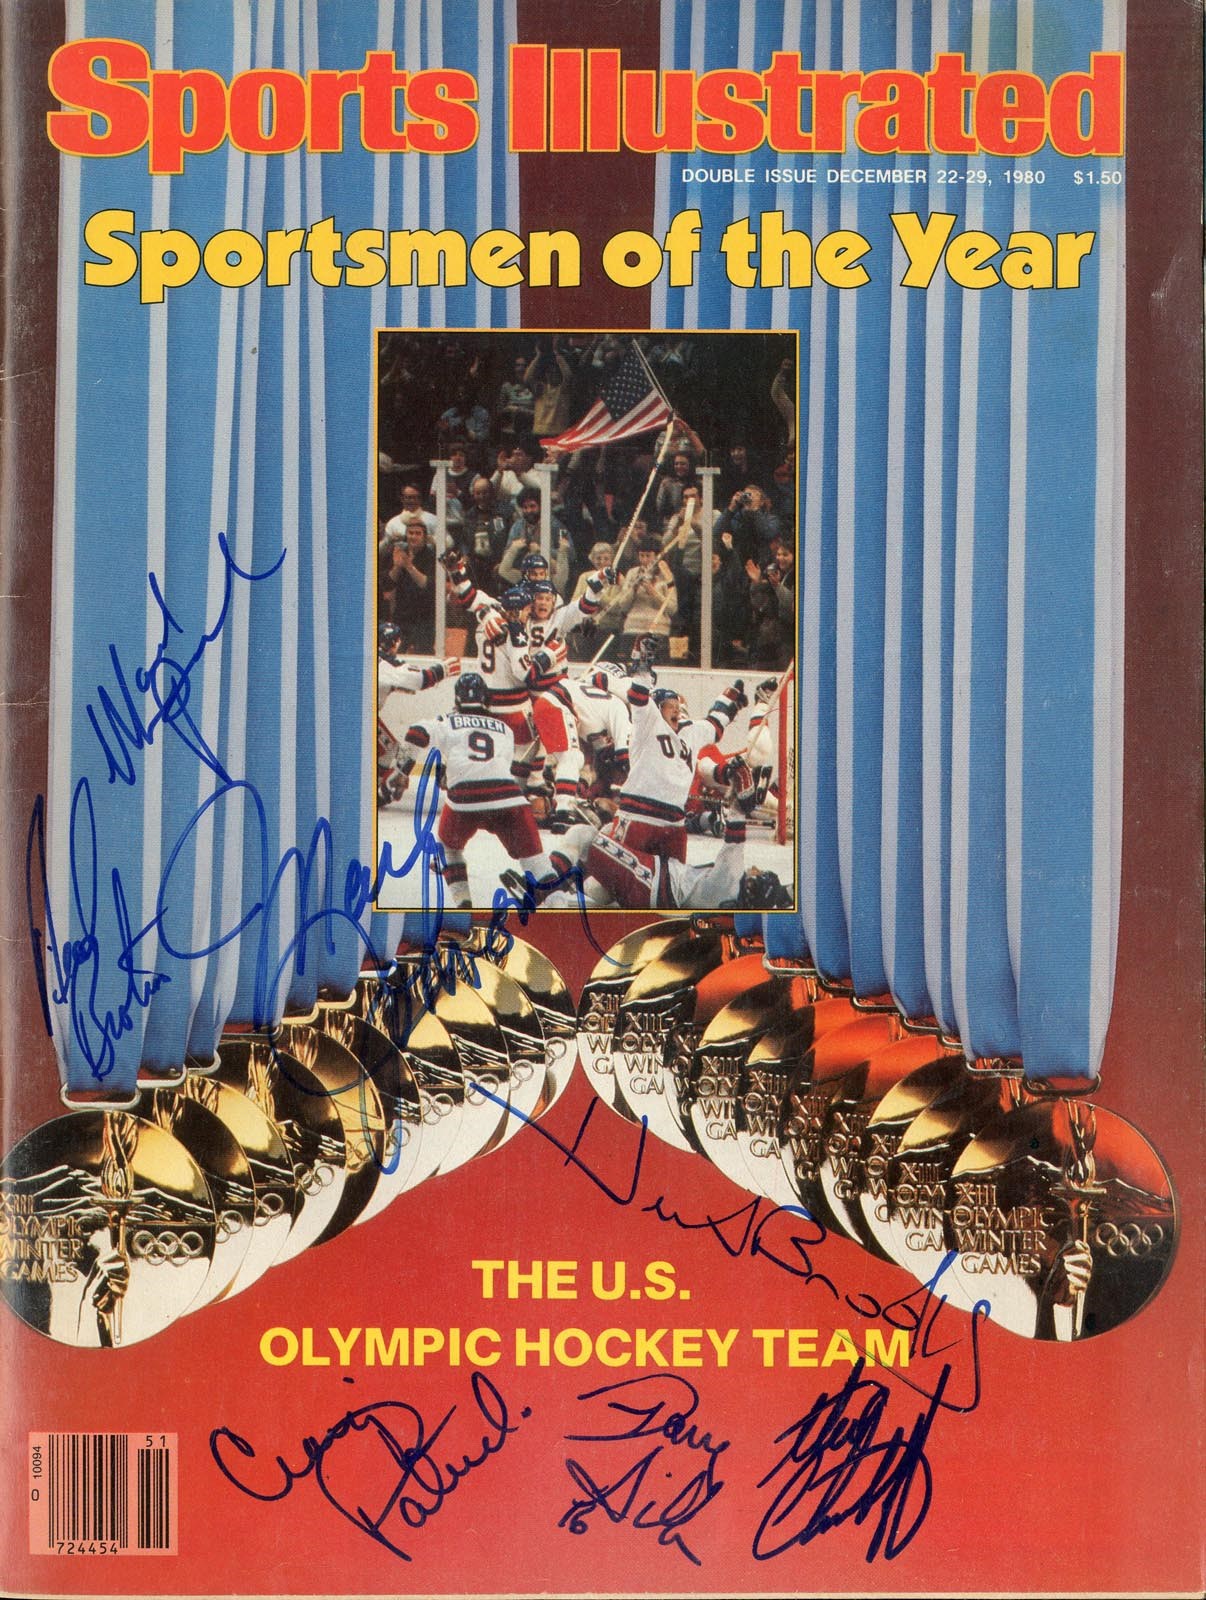 - 1980 USA Hockey "Miracle" Team Signed Sports Illustrated & Book - Both with Herb Brooks